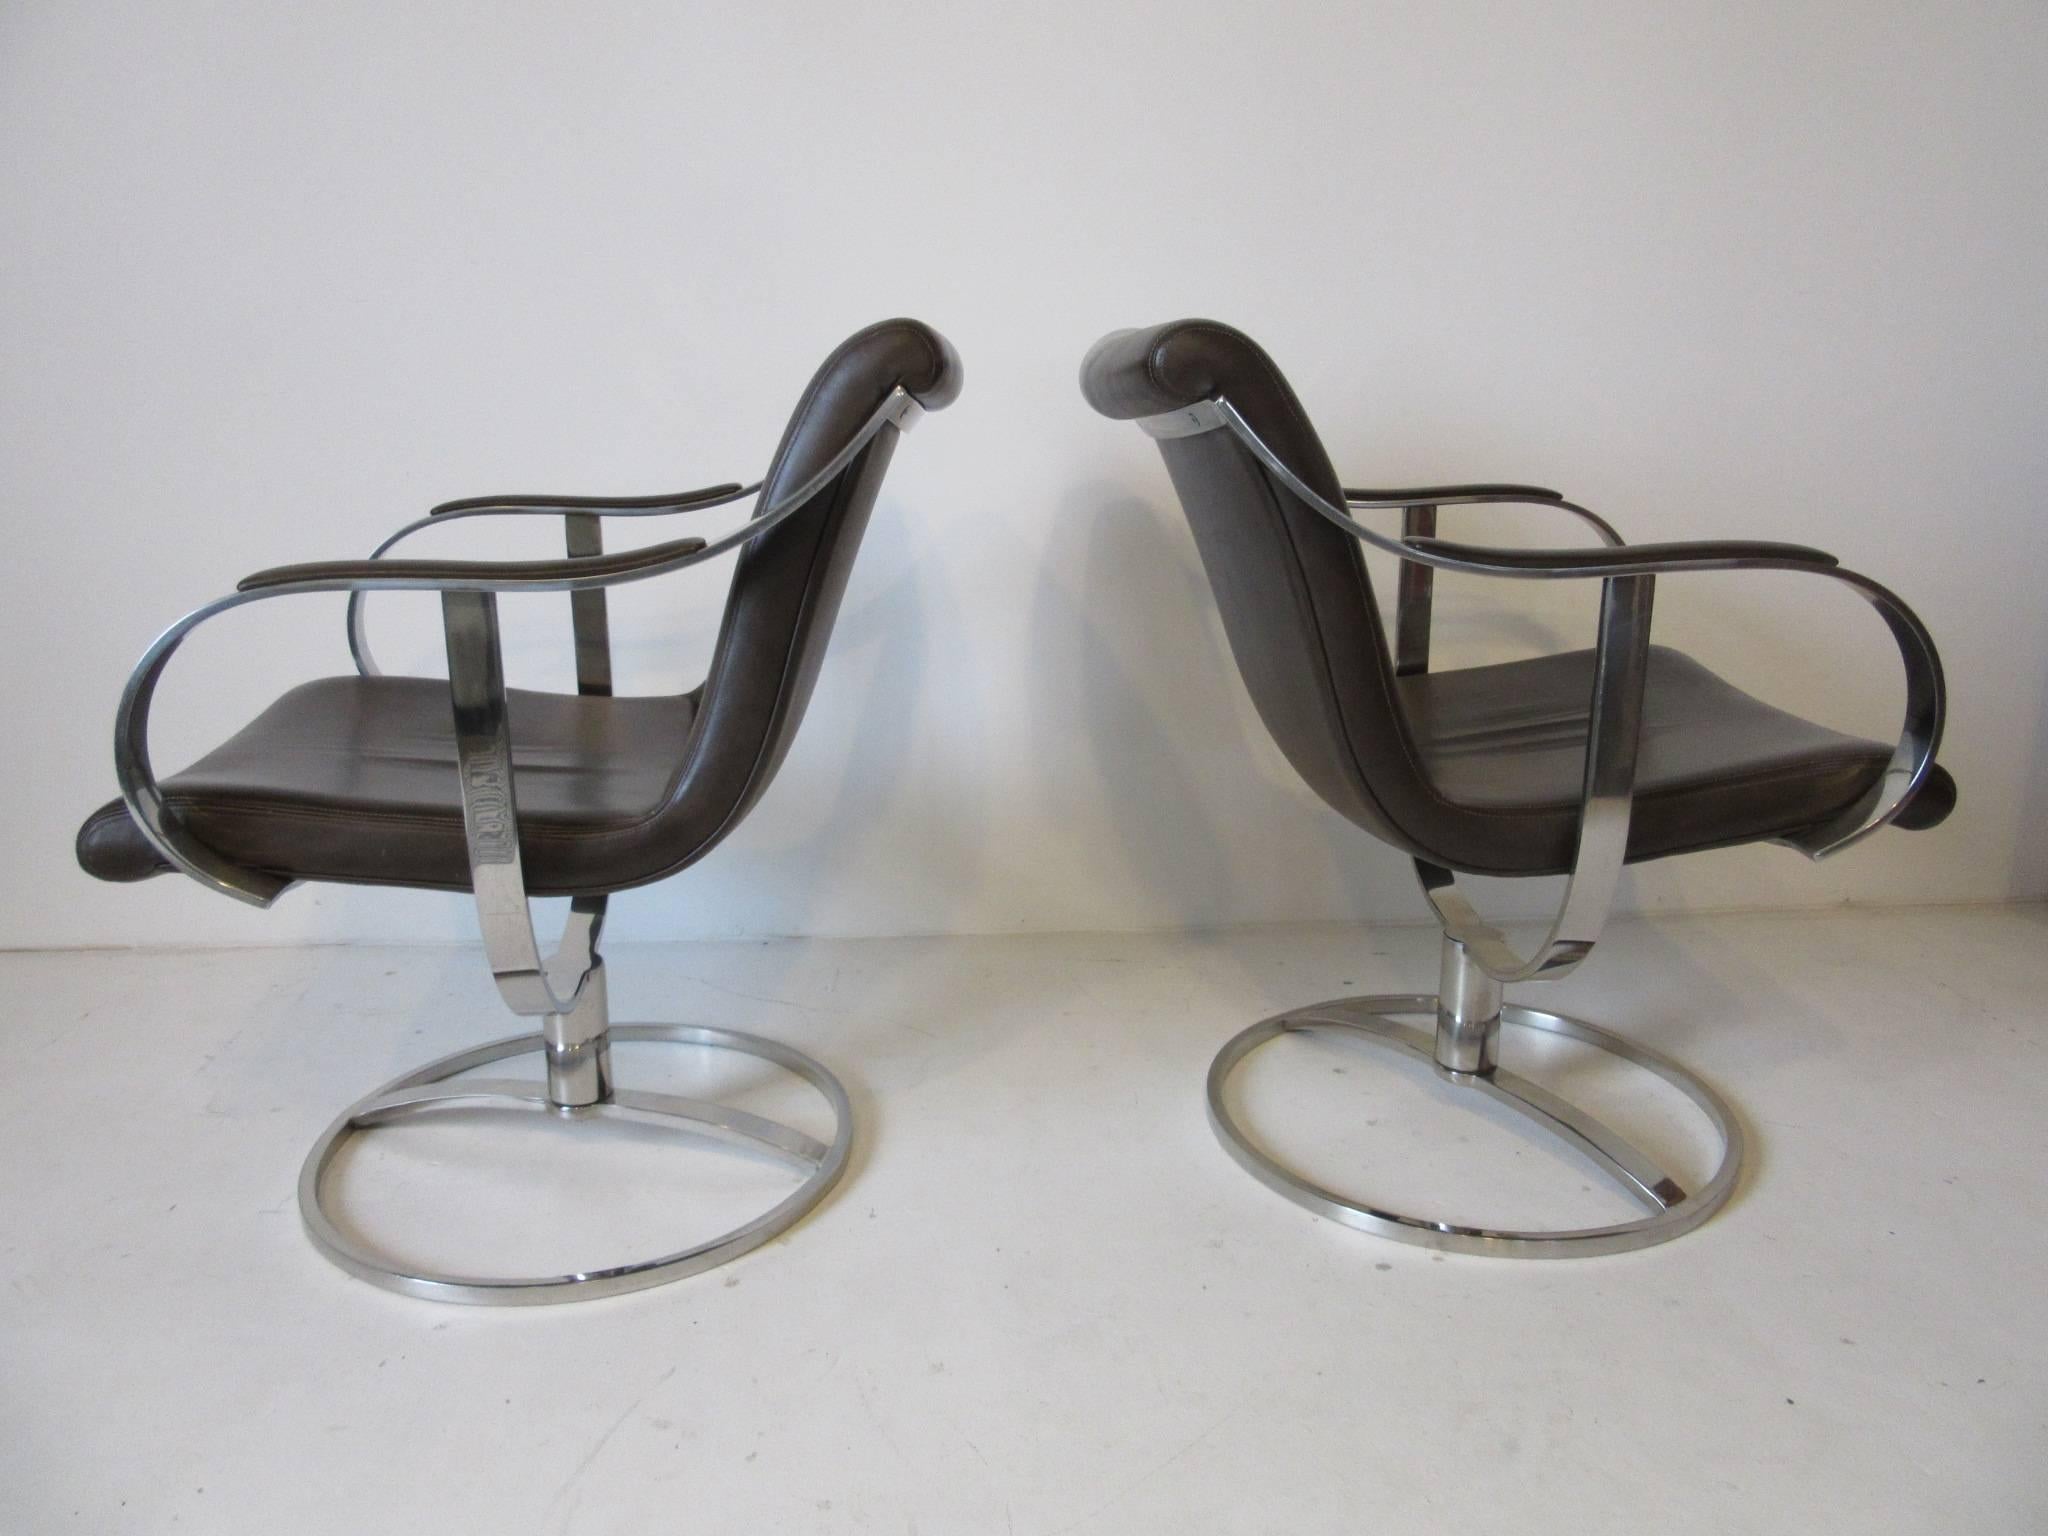 A pair of well constructed chromed steel sculptural lounge chairs with dark coffee bean colored leather upholstery and swivelling bases . Manufactured by the Steelcase Furniture company.